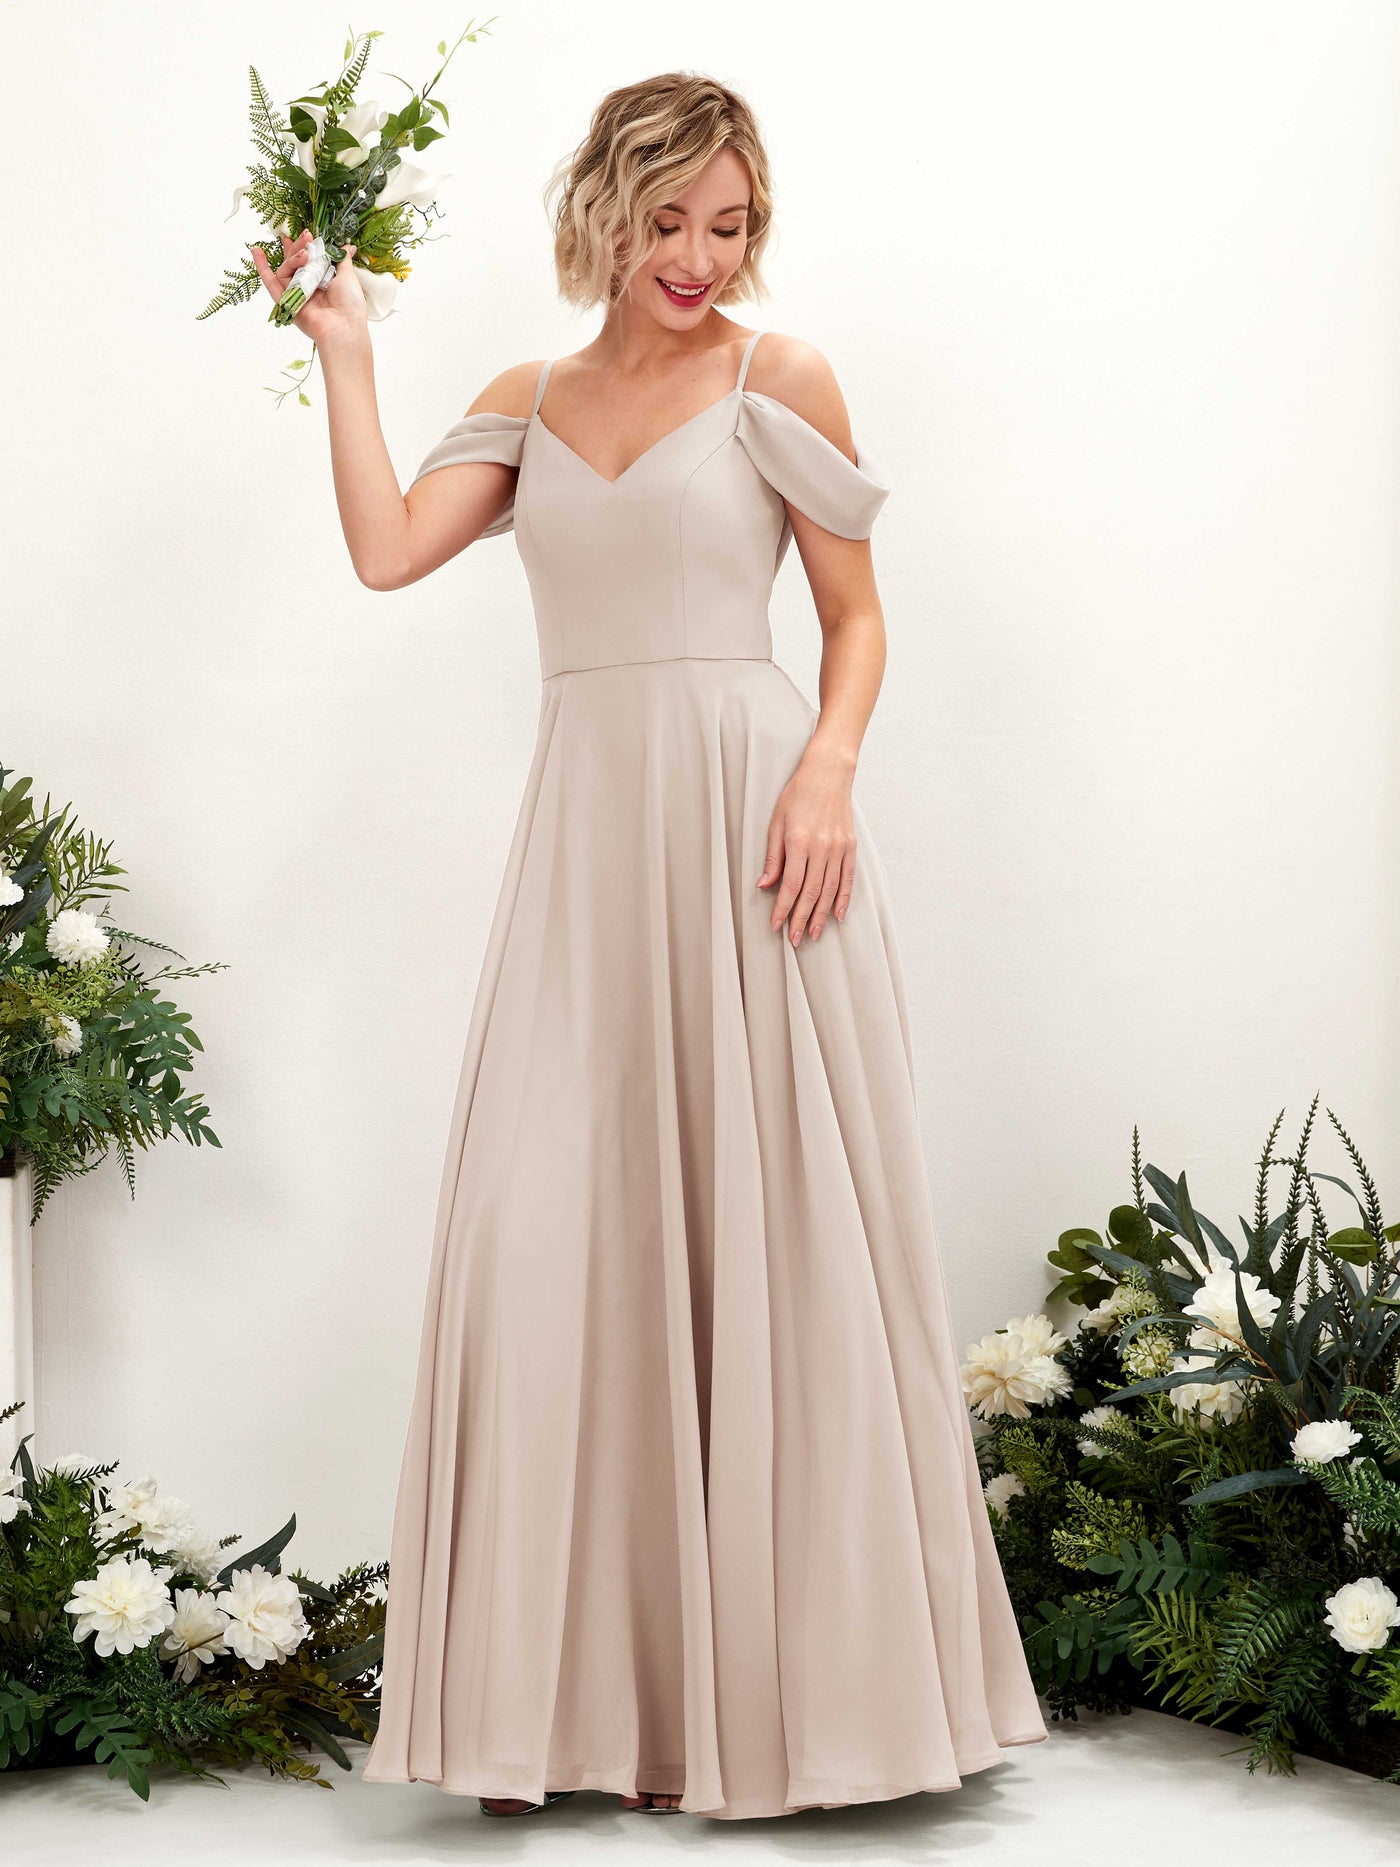 Champagne Bridesmaid Dresses Bridesmaid Dress A-line Chiffon Off Shoulder Full Length Sleeveless Wedding Party Dress (81224916)#color_champagne